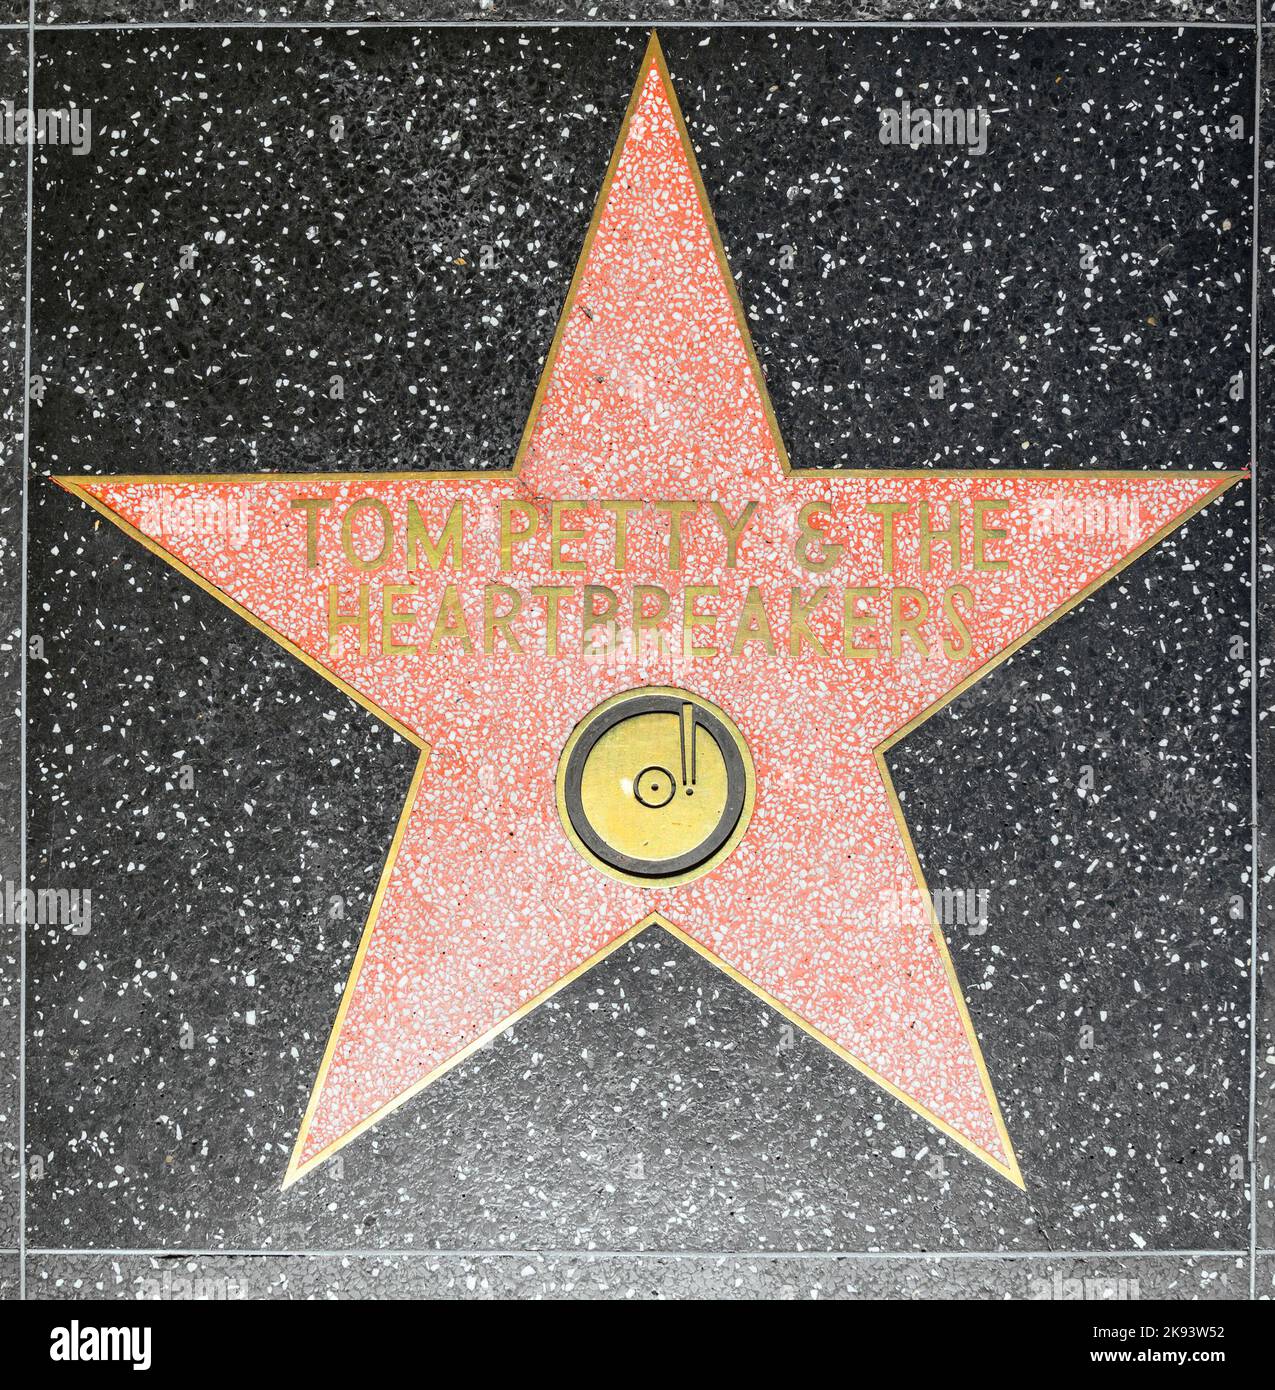 HOLLYWOOD - JUNE 26: Tom Petty & the Heartbreakers  star on Hollywood Walk of Fame on June 26, 2012 in Hollywood, California. This star is located on Stock Photo